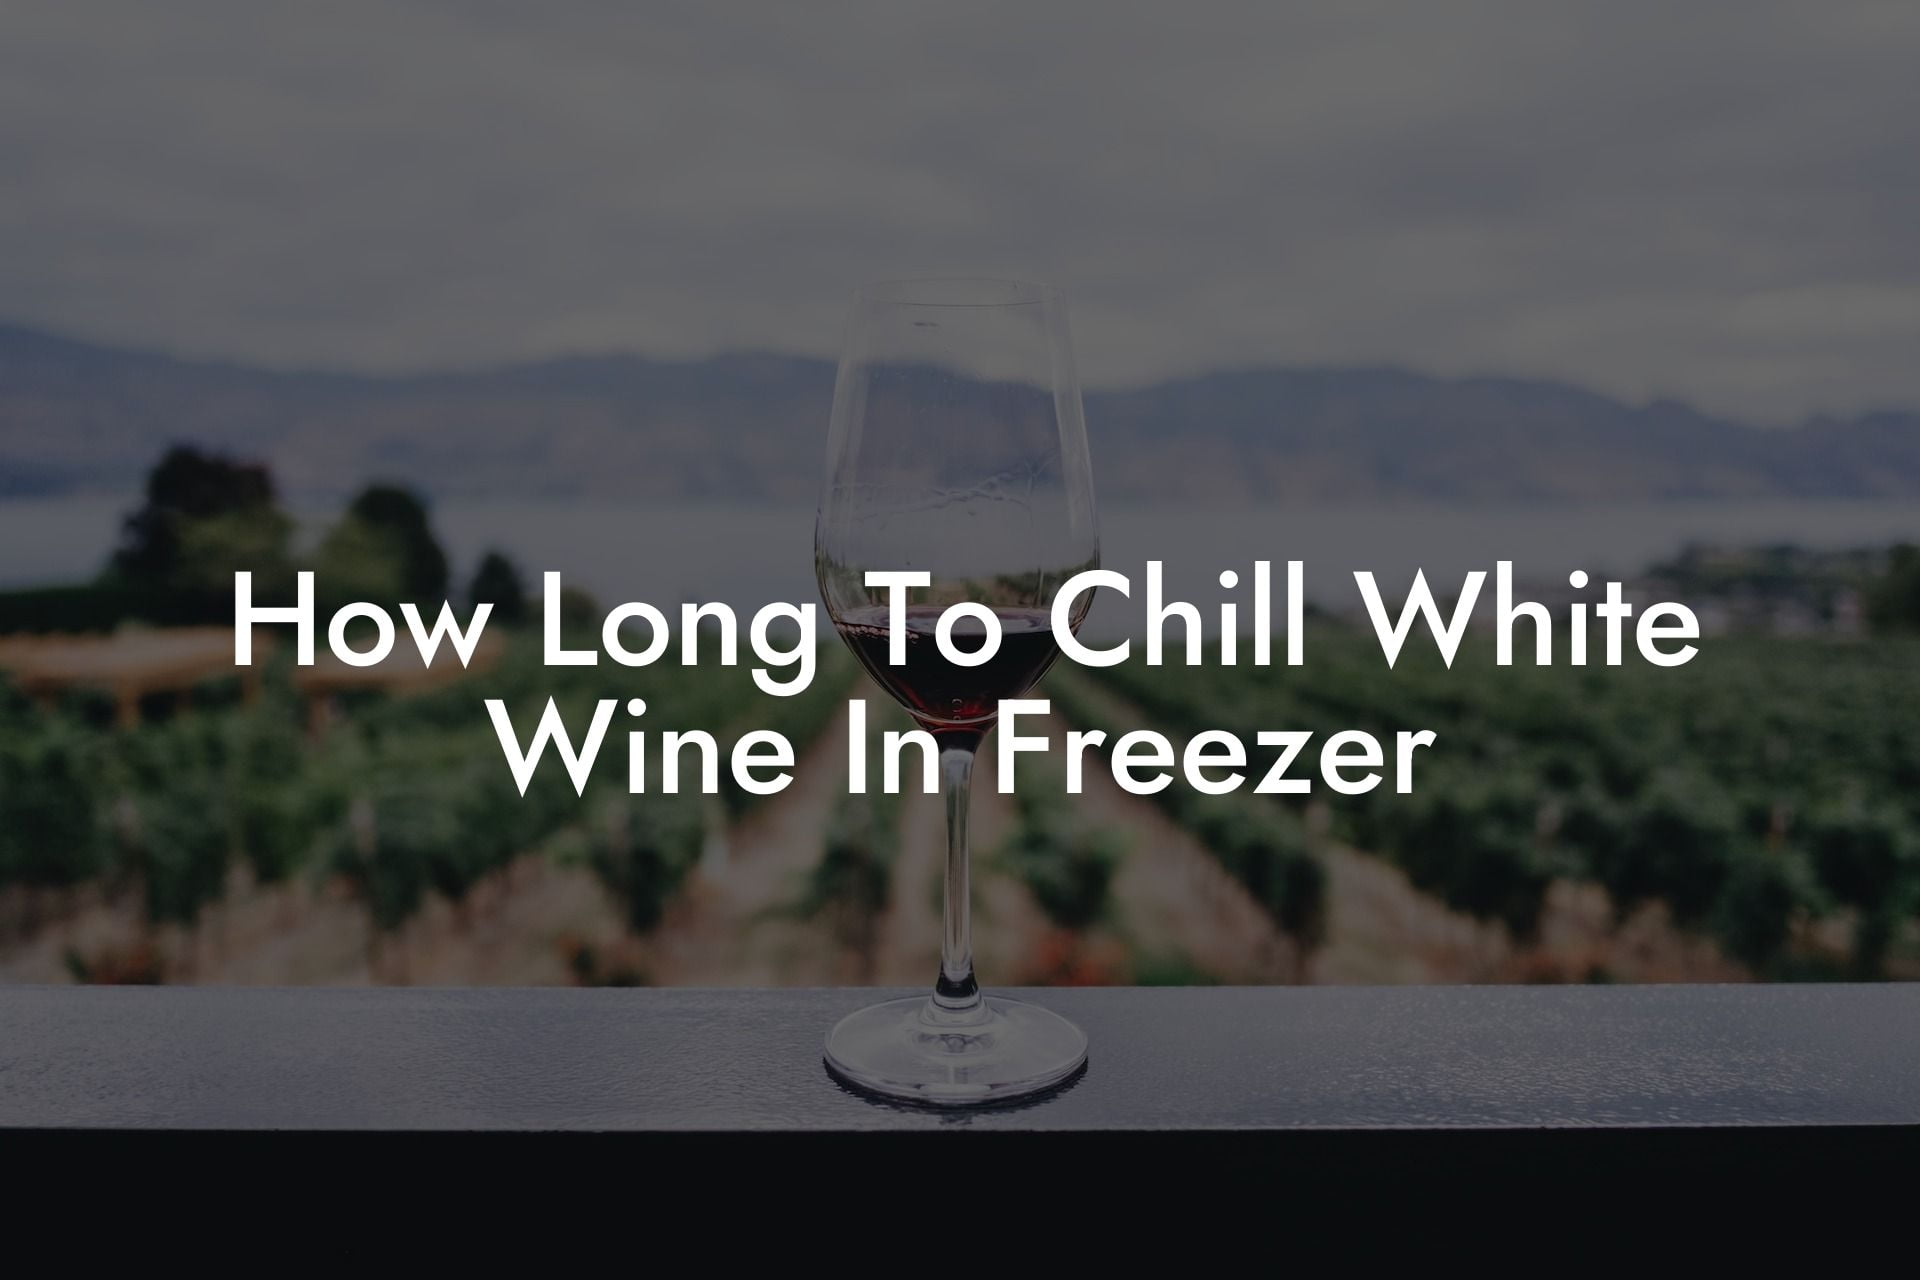 How Long To Chill White Wine In Freezer